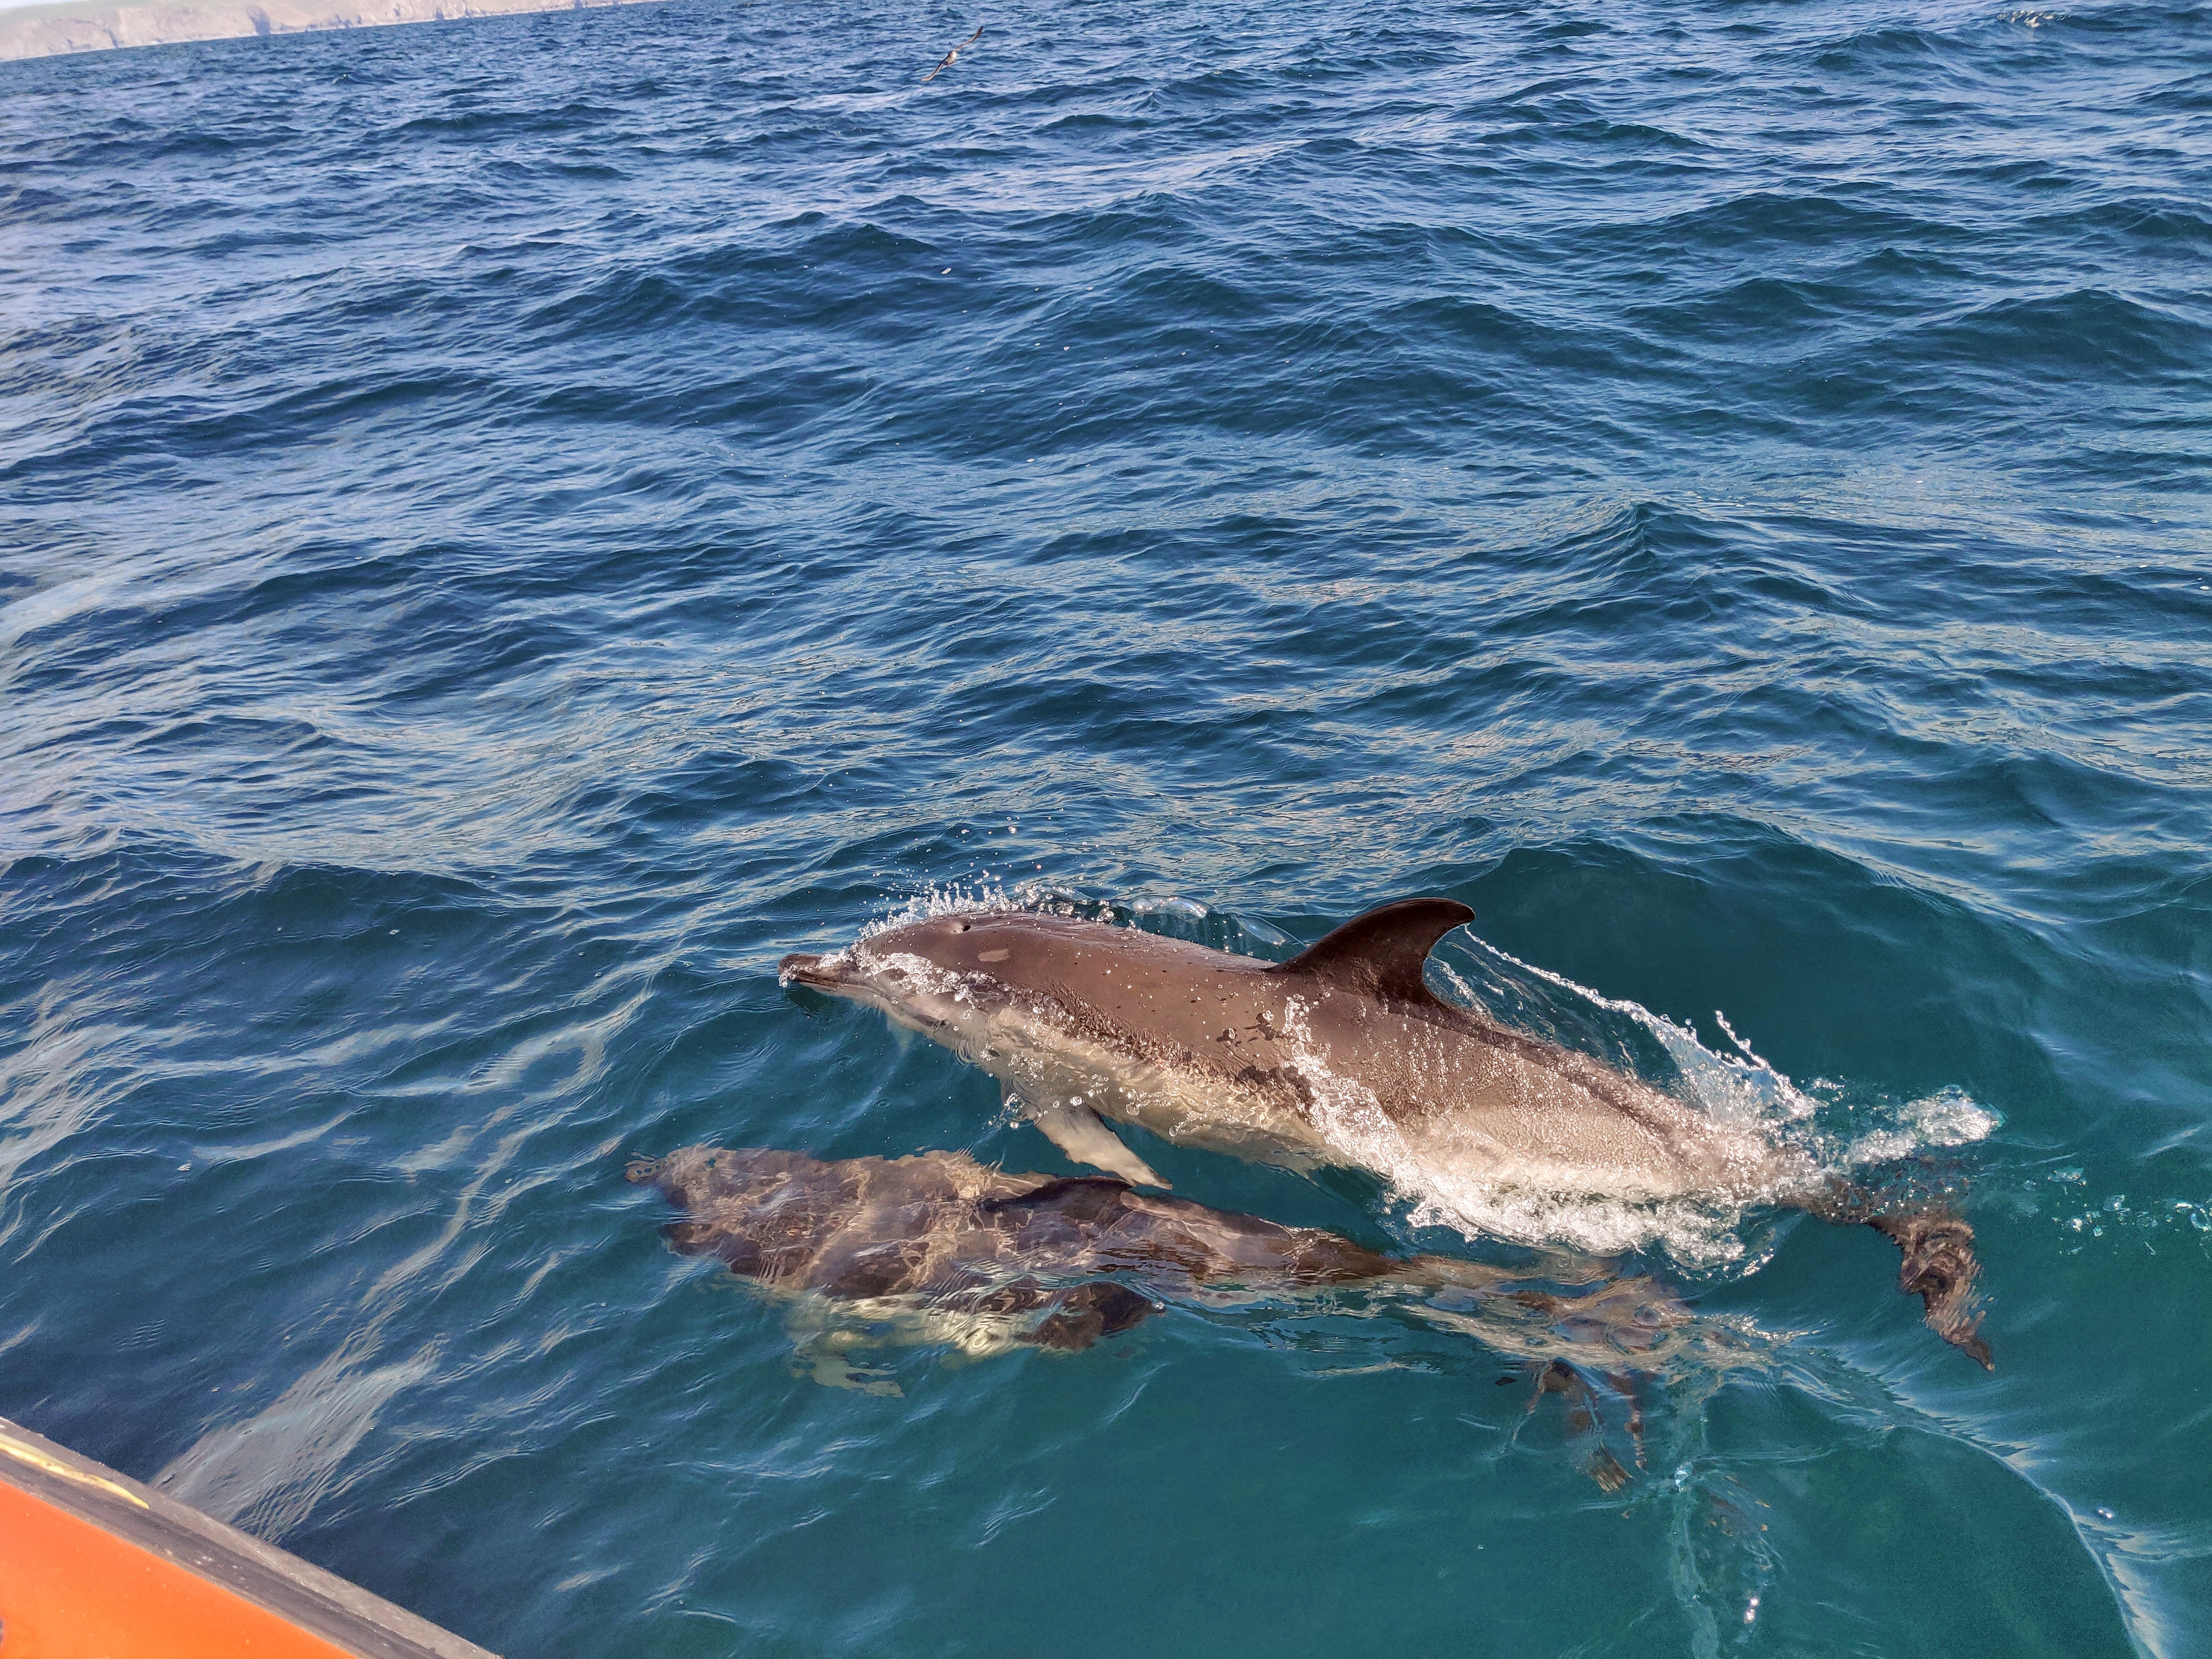 “2 common dolphins swimming alongside the boat, one of them is breaking the surface with its fin”